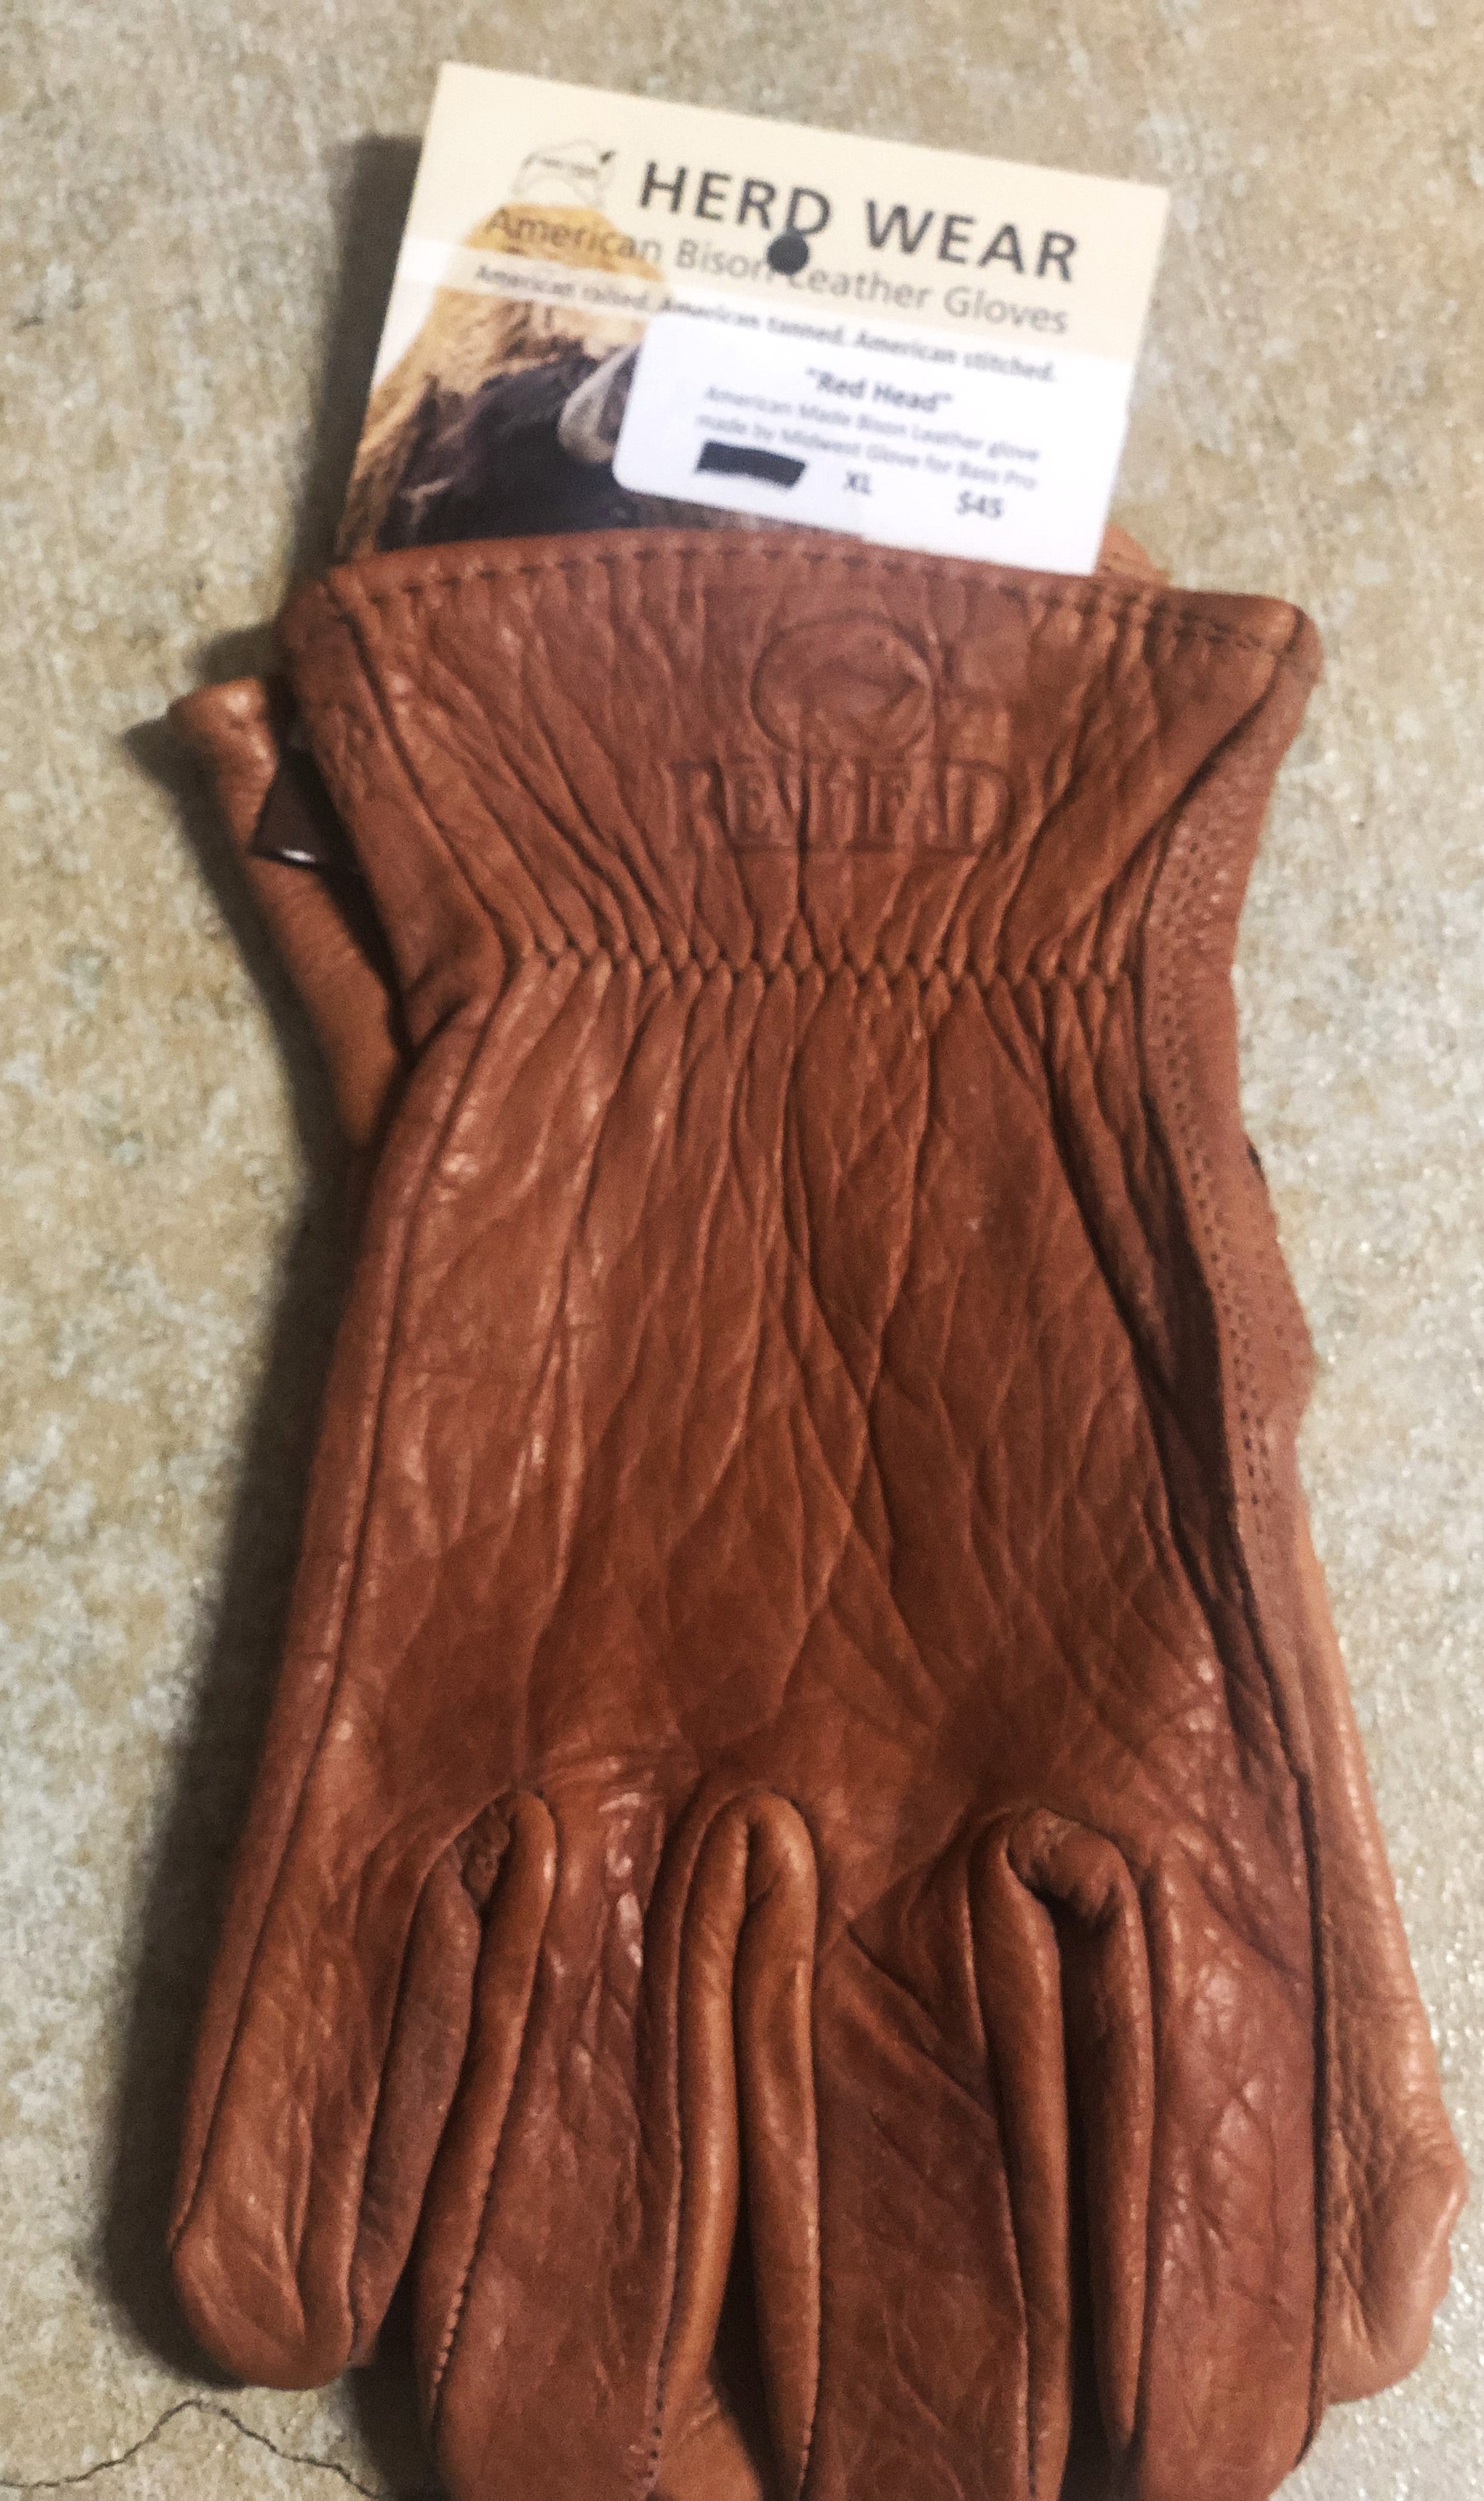 Midwest Glove - American Made Bison Leather Work Gloves